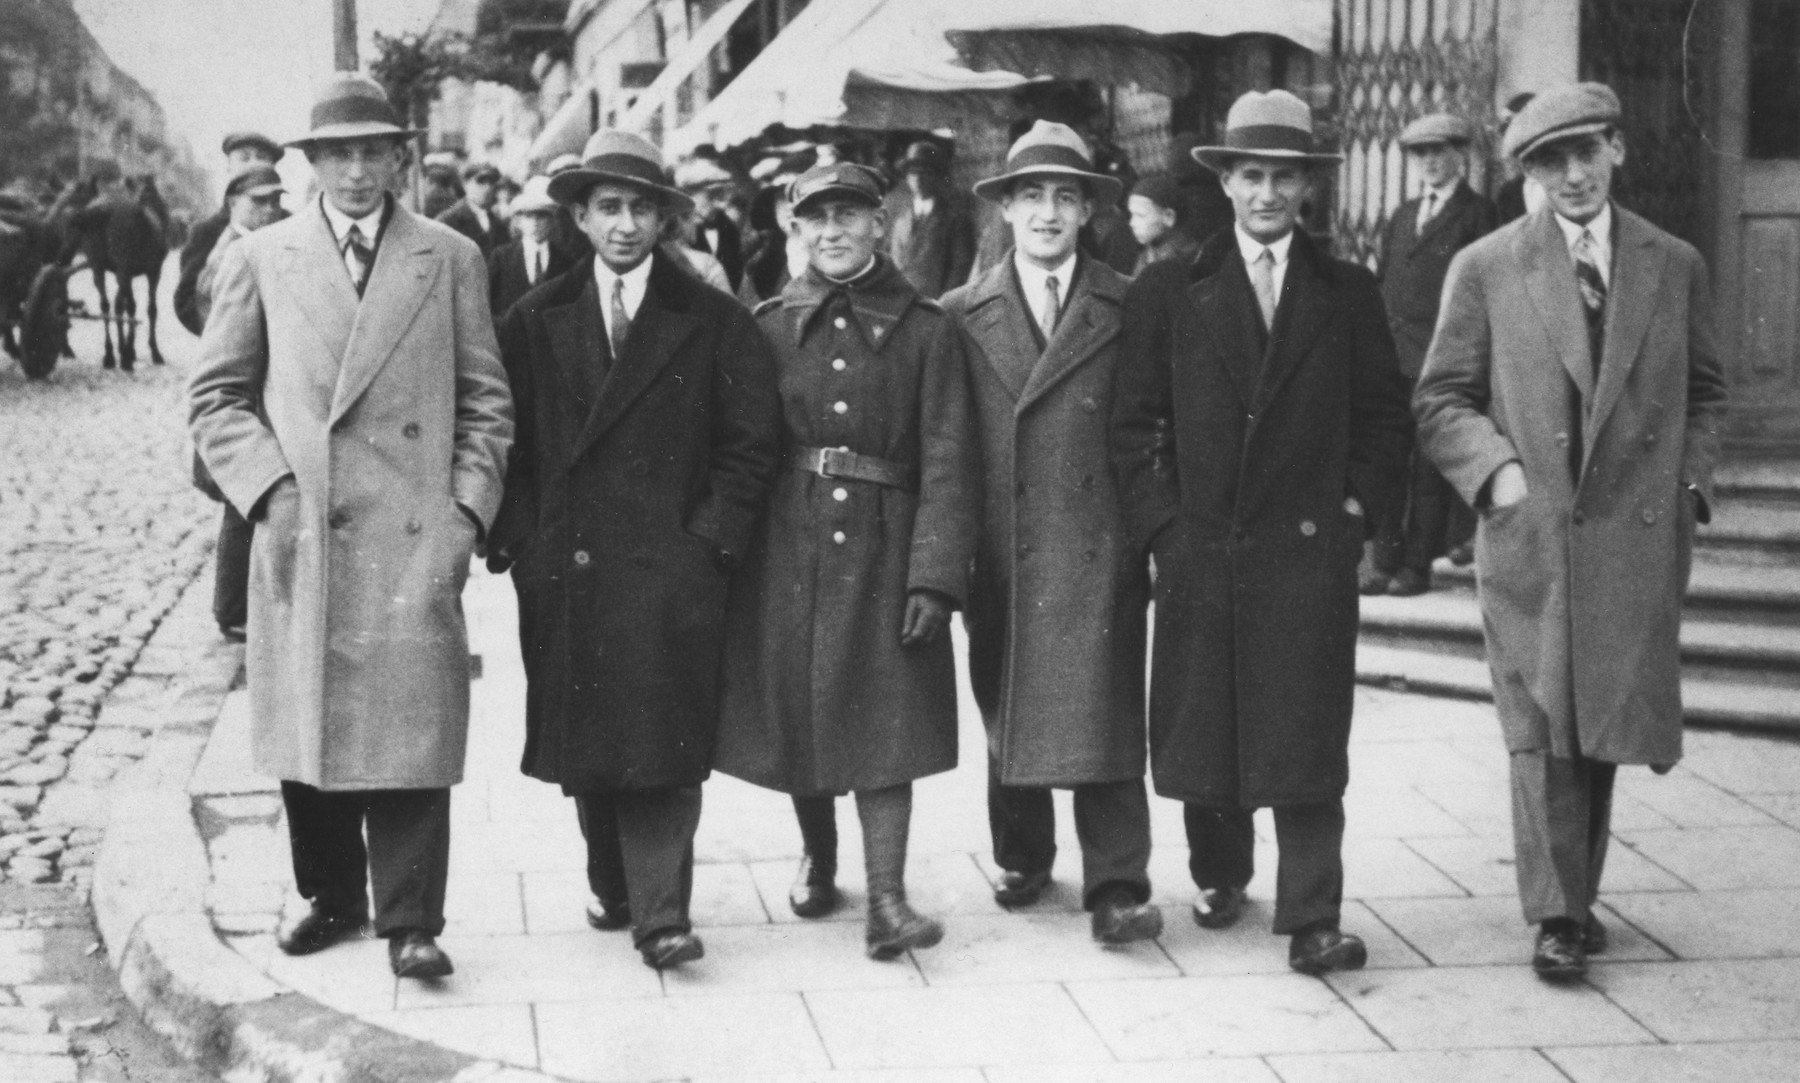 A group of Jewish friends walk along the main street of Piotrkow Trybunalski.

Pictured from left to right are: Weinberg, Schmel Lieberman, Itchak Rosencweig, Schmuel David Horn, and Boruch Hersh Weinberg.